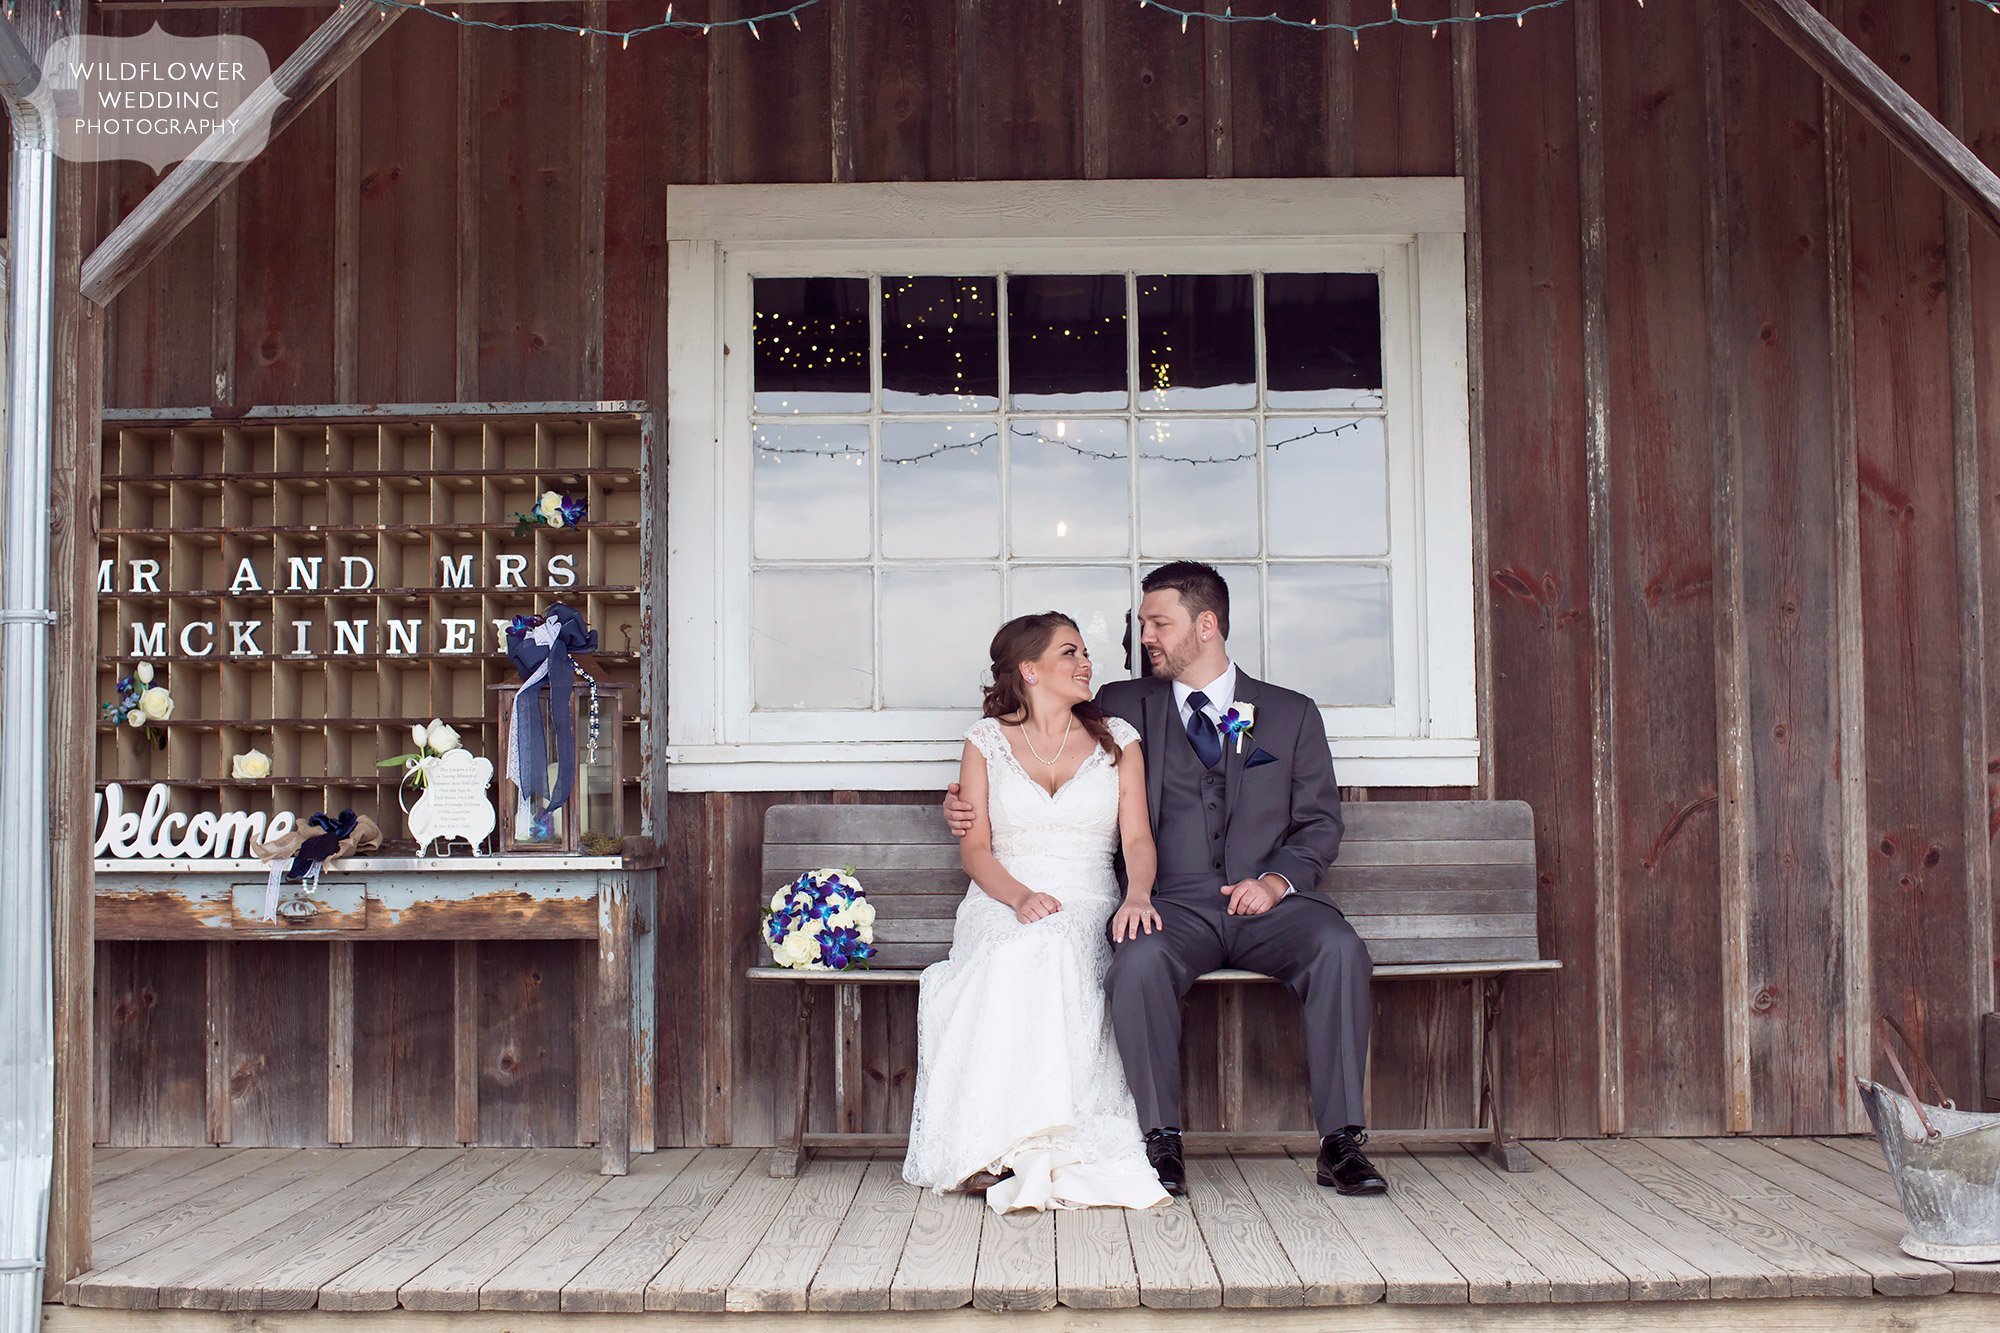 This beautiful barn wedding venue is just north of Kansas City and is gorgeous!